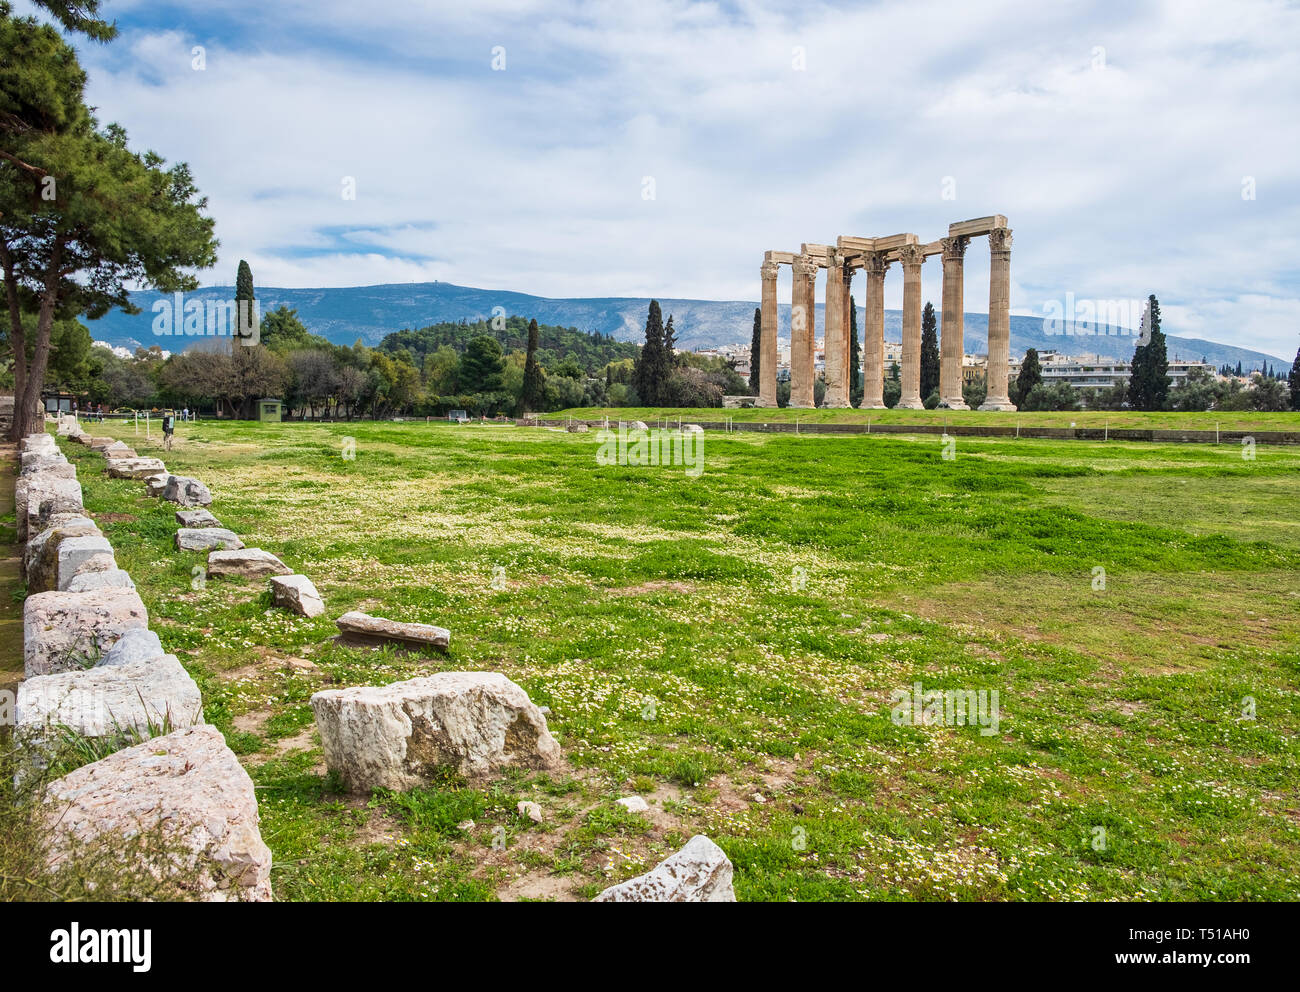 Ruins of the ancient Temple of Olympian Zeus in Athens (Olympieion or Columns of the Olympian Zeus) Stock Photo